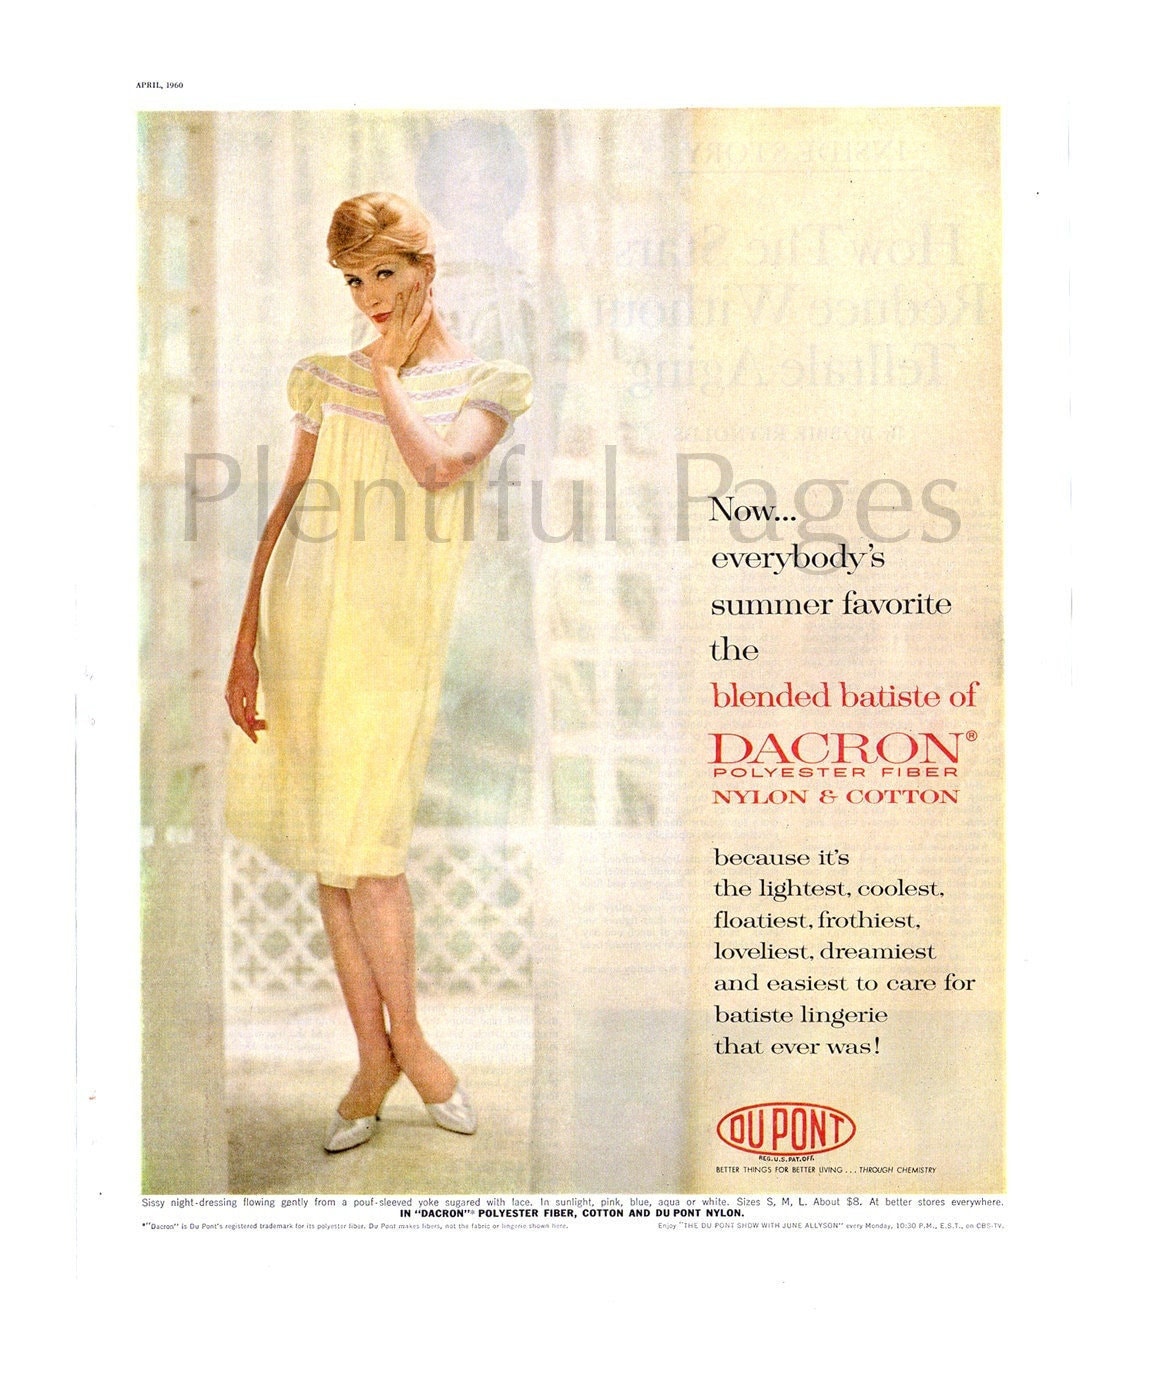 1960 DuPont Dacron Vintage Ad, 1960's Fashion, Advertising Art, Batiste  Lingerie, 1960's Housewife, Vintage Fabric, Great for Framing.